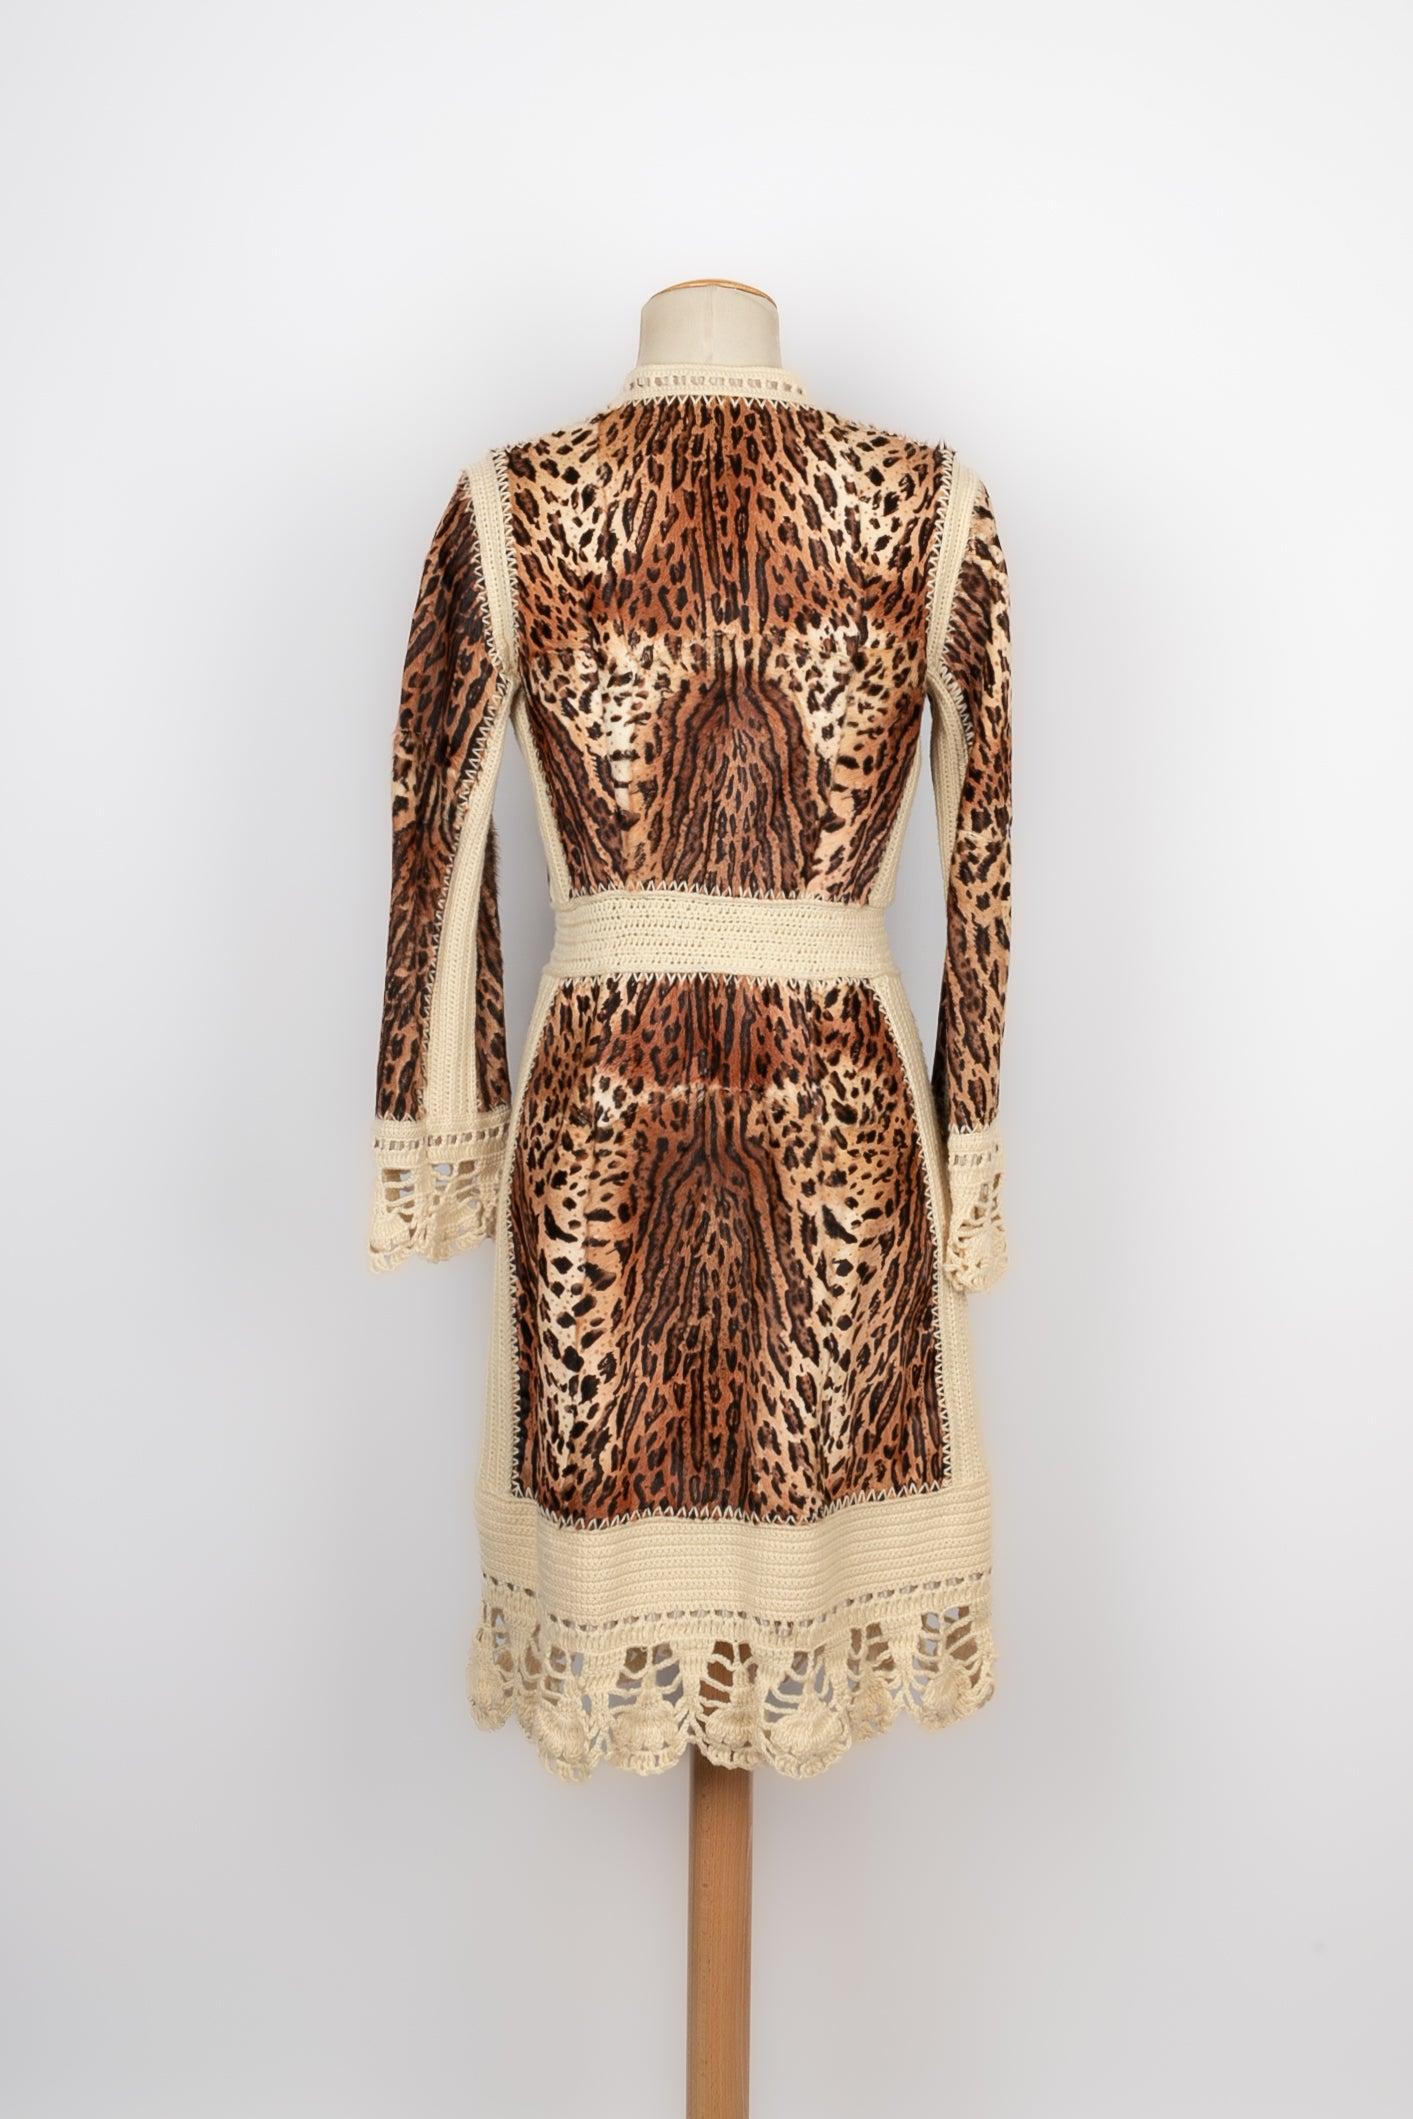 Dior Kid Goat Fur Coat Printed in Brown and Beige Tones, 2005  In Excellent Condition For Sale In SAINT-OUEN-SUR-SEINE, FR